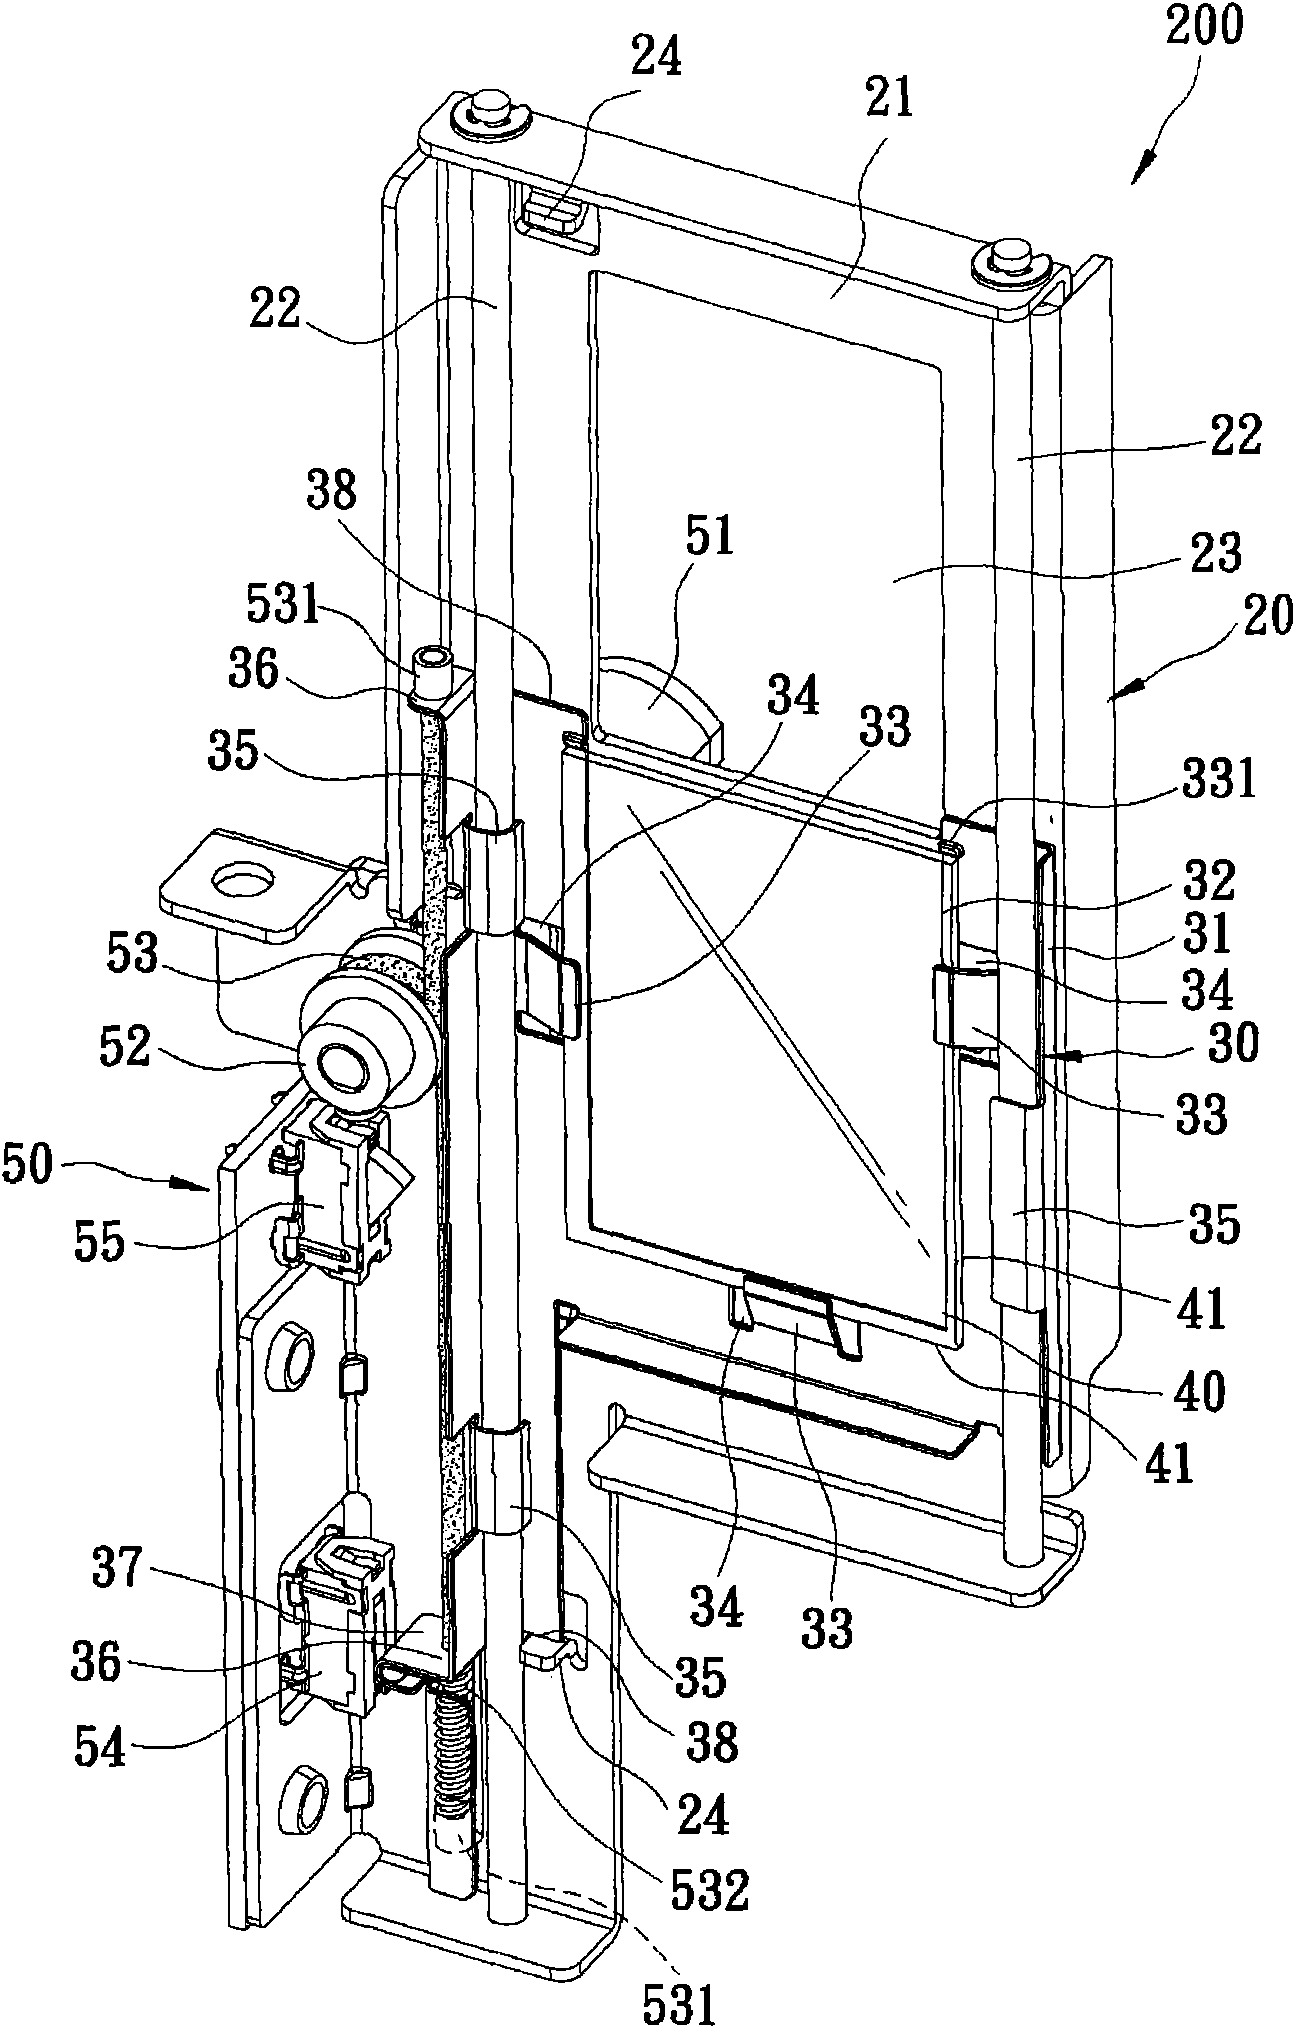 Filter switching module for optical projection system